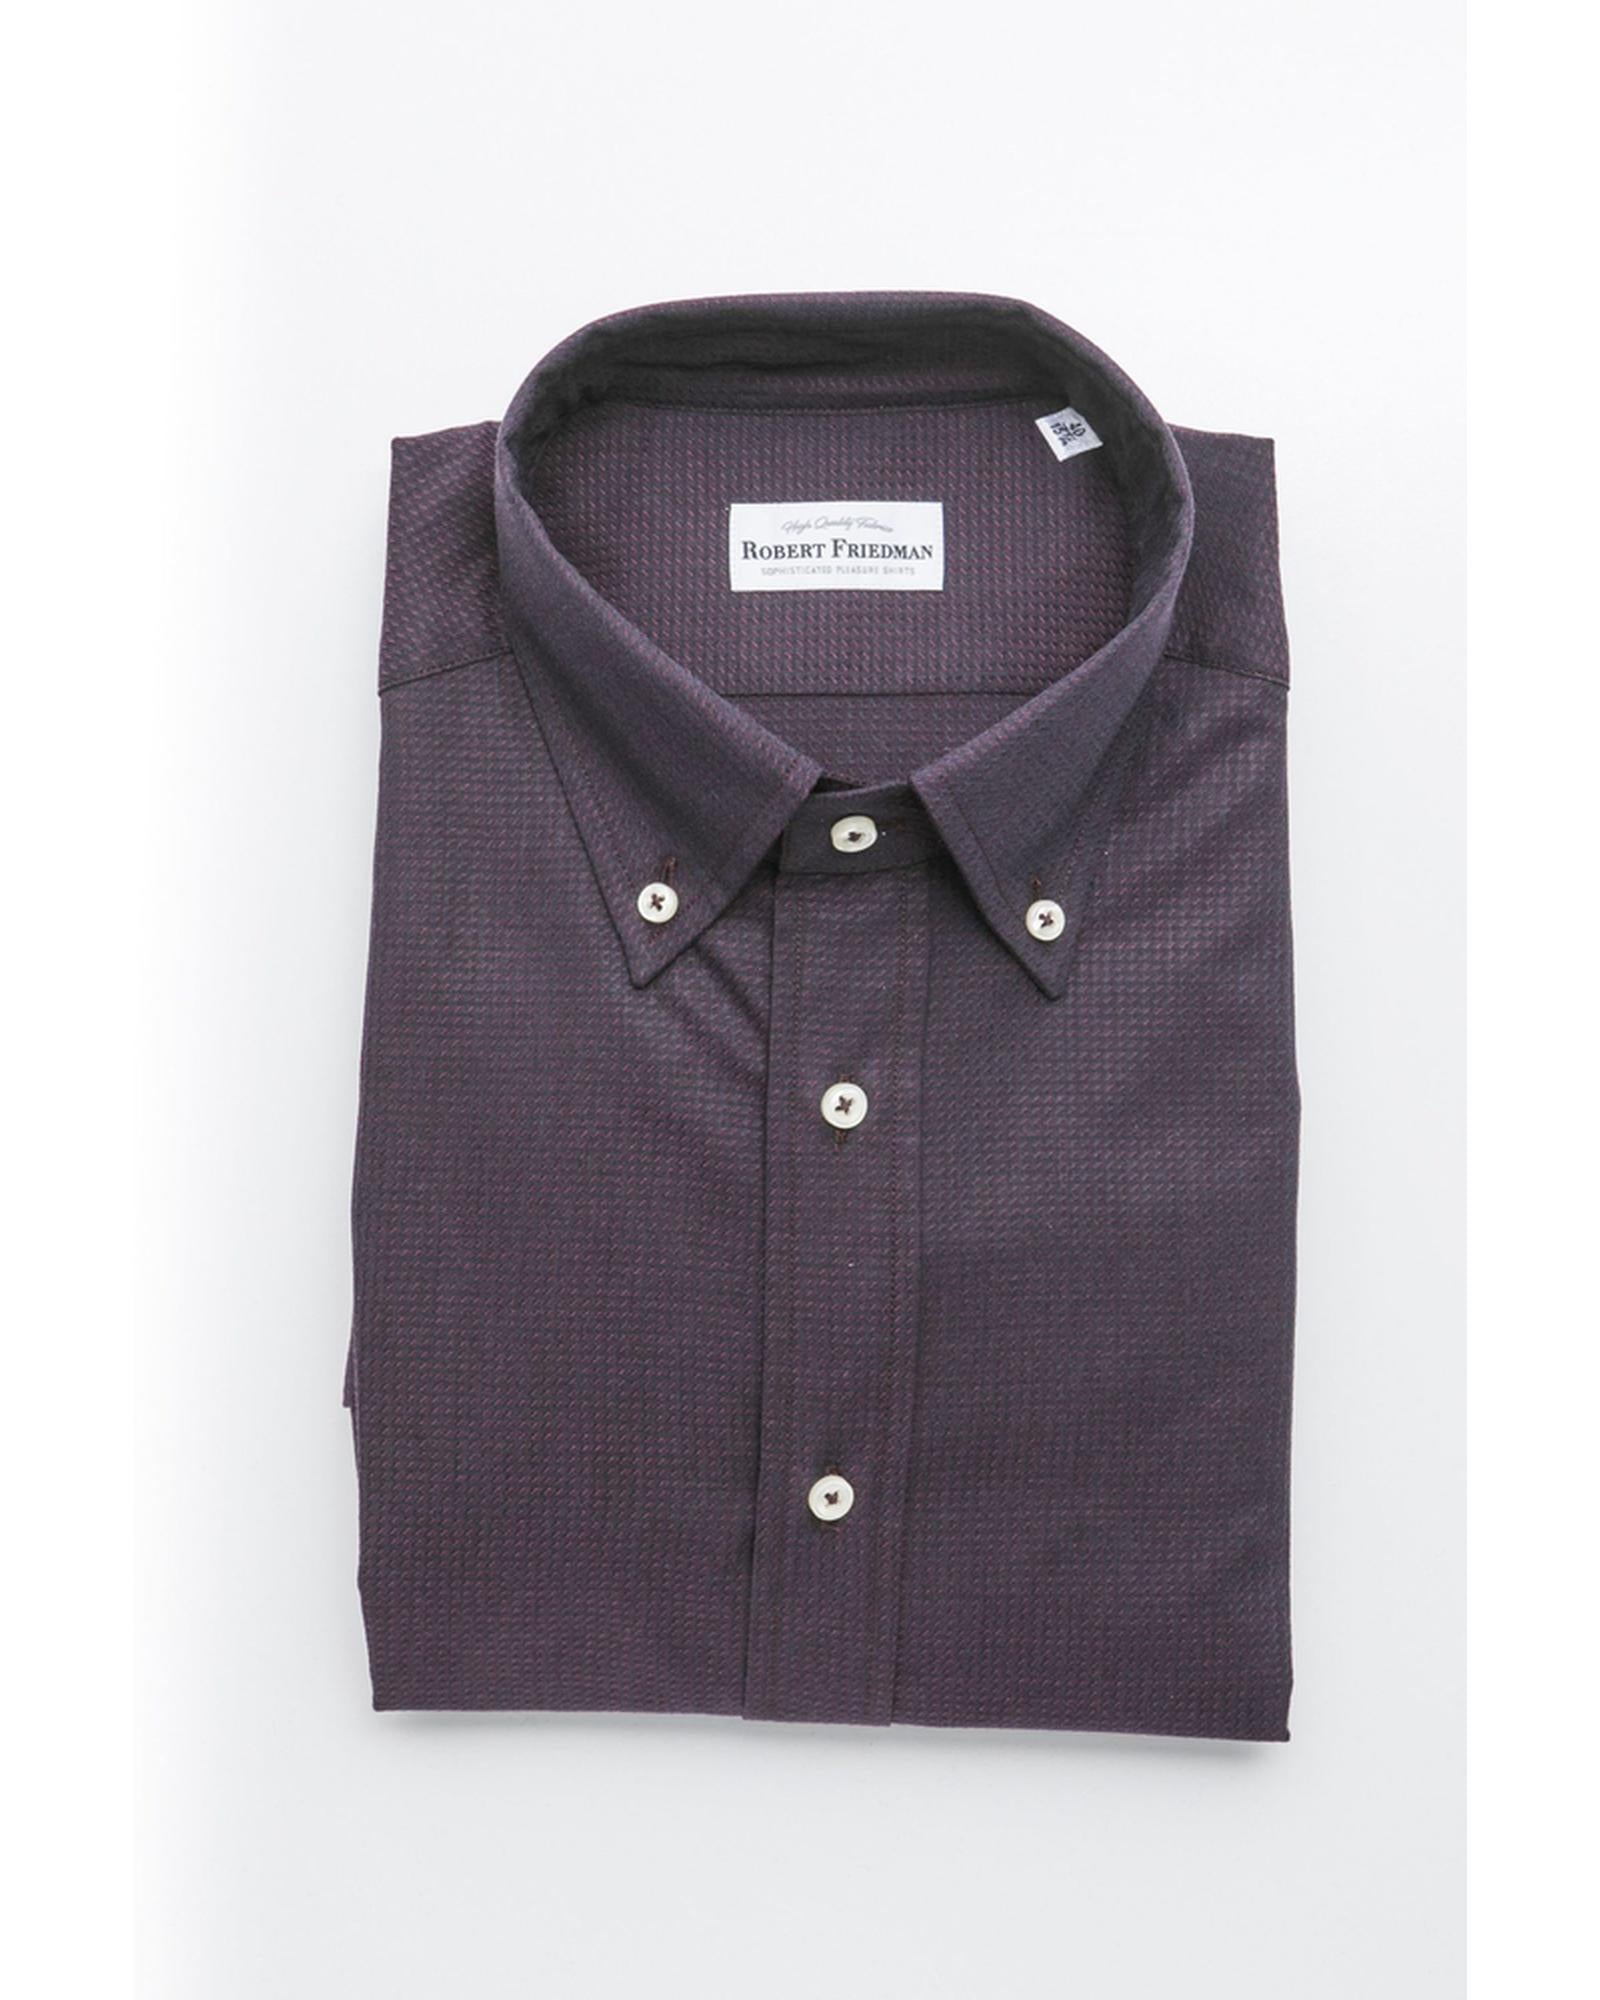 Classic Button Down Shirt for Effortless Style 42 IT Men